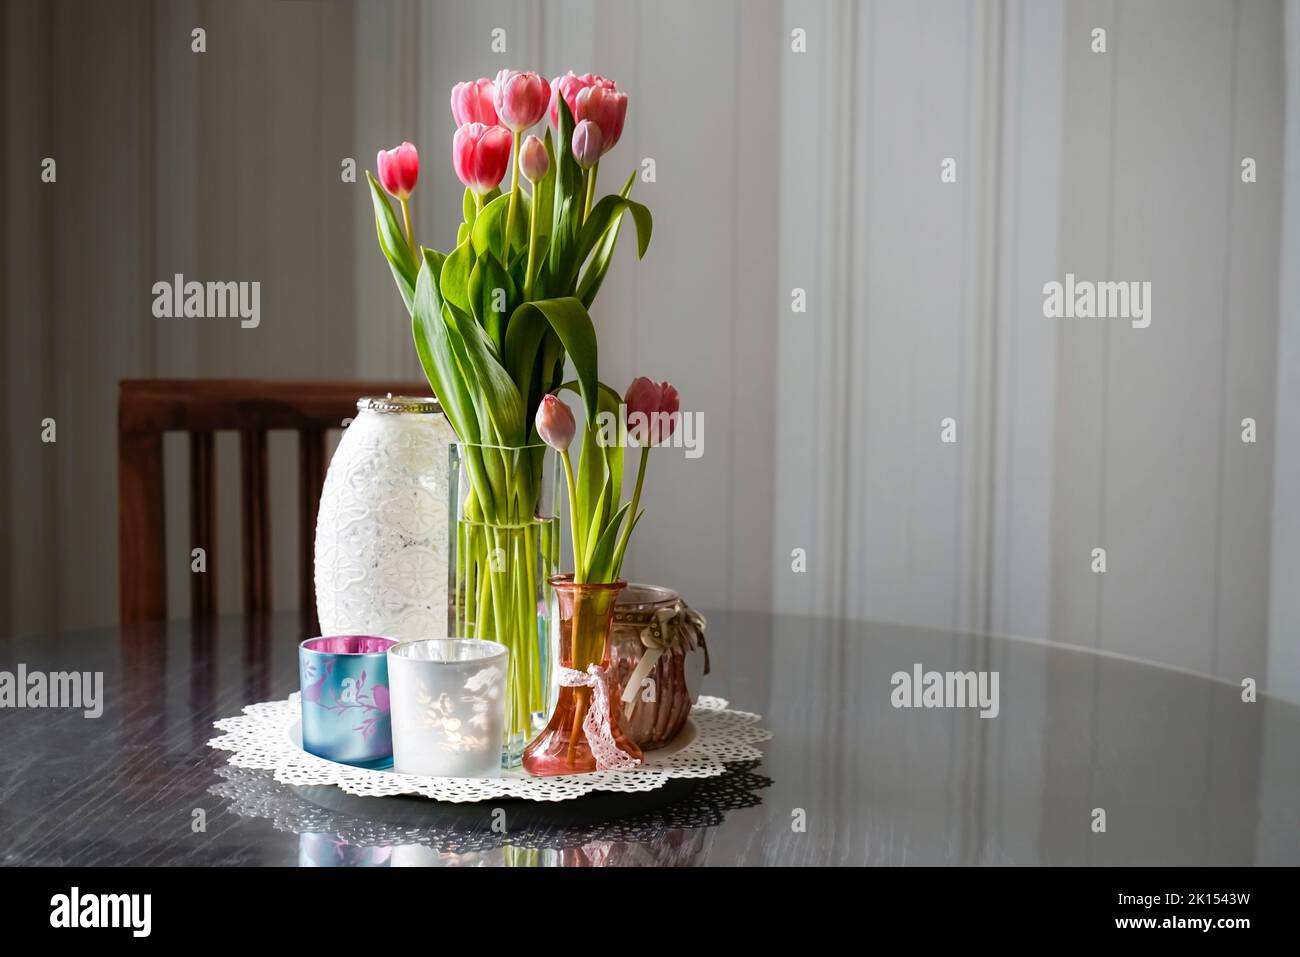 Long stemmed pink tulips with several glass jars on a round wooden table. In the background is a chair and striped wallpaper. Antique romantic look. Stock Photo